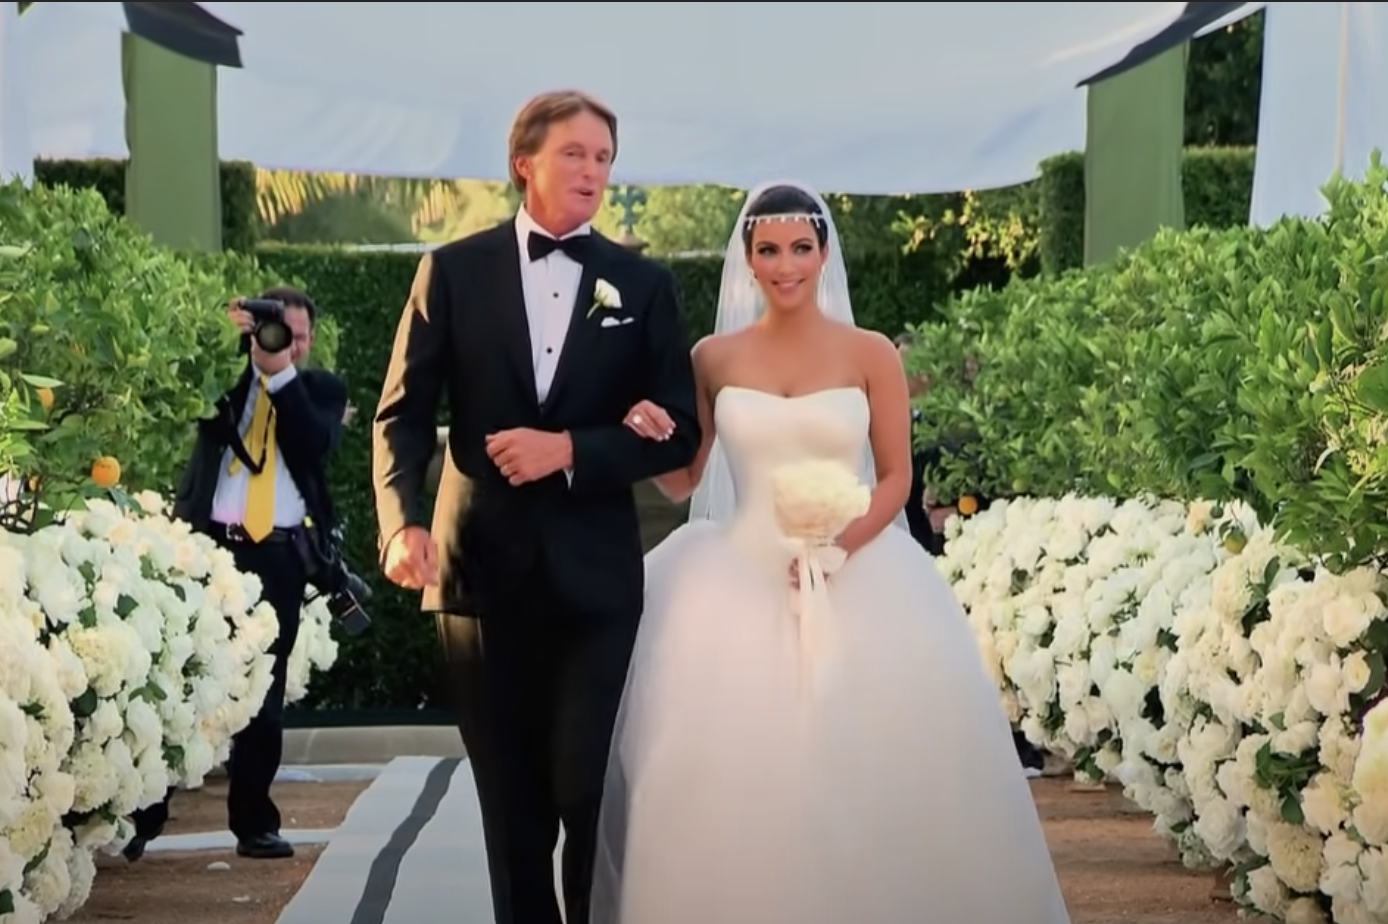 Kim walking with Caitlyn Jenner down the aisle